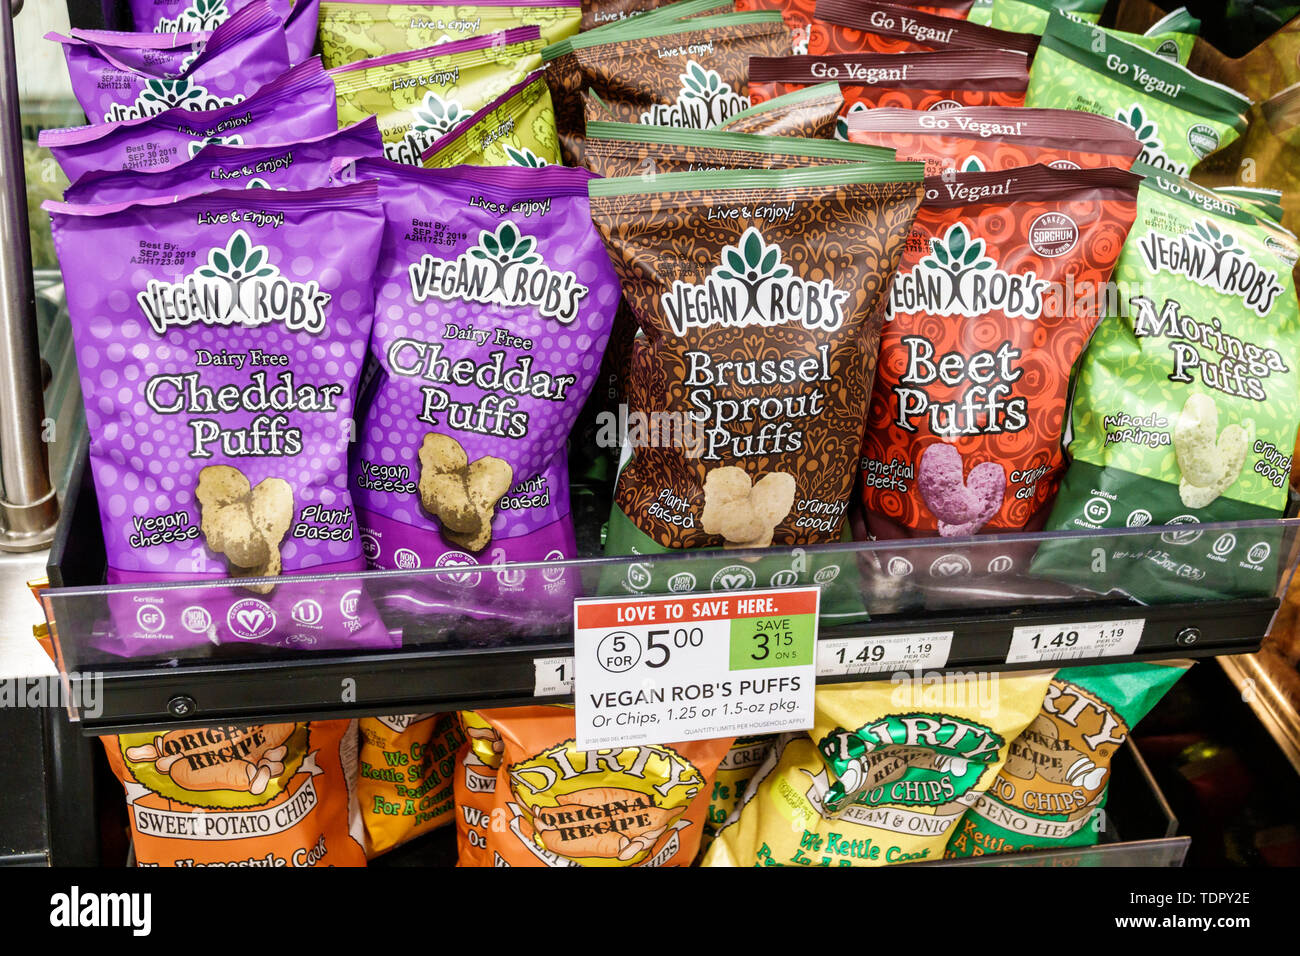 Miami Beach North Beach Publix Grocery Store Supermarket Inside Interior Snacks Vegan Rob S Brand Ships Crisps Cheddar Puffs Sale Sign Dis Stock Photo Alamy,Free Crochet Shawl Patterns For Beginners